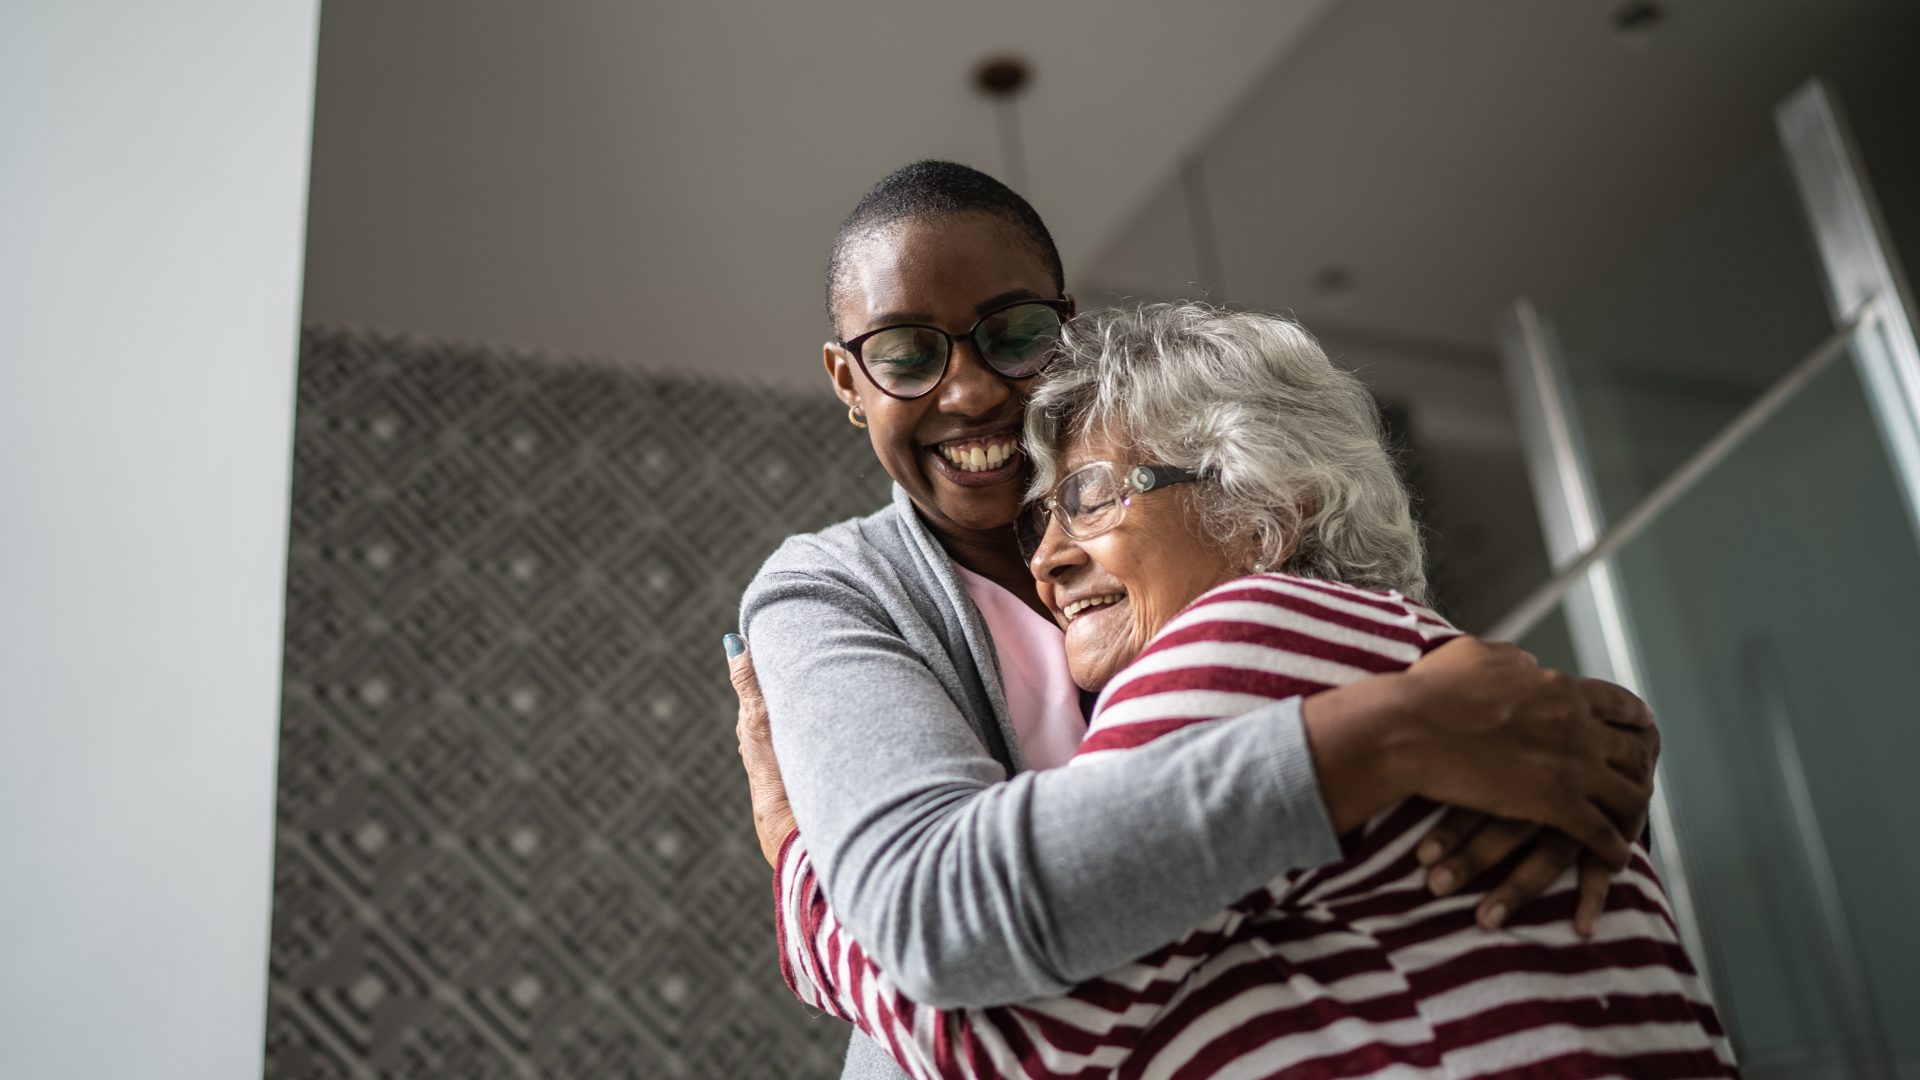 A younger carer and older lady hugging and smiling in home environment